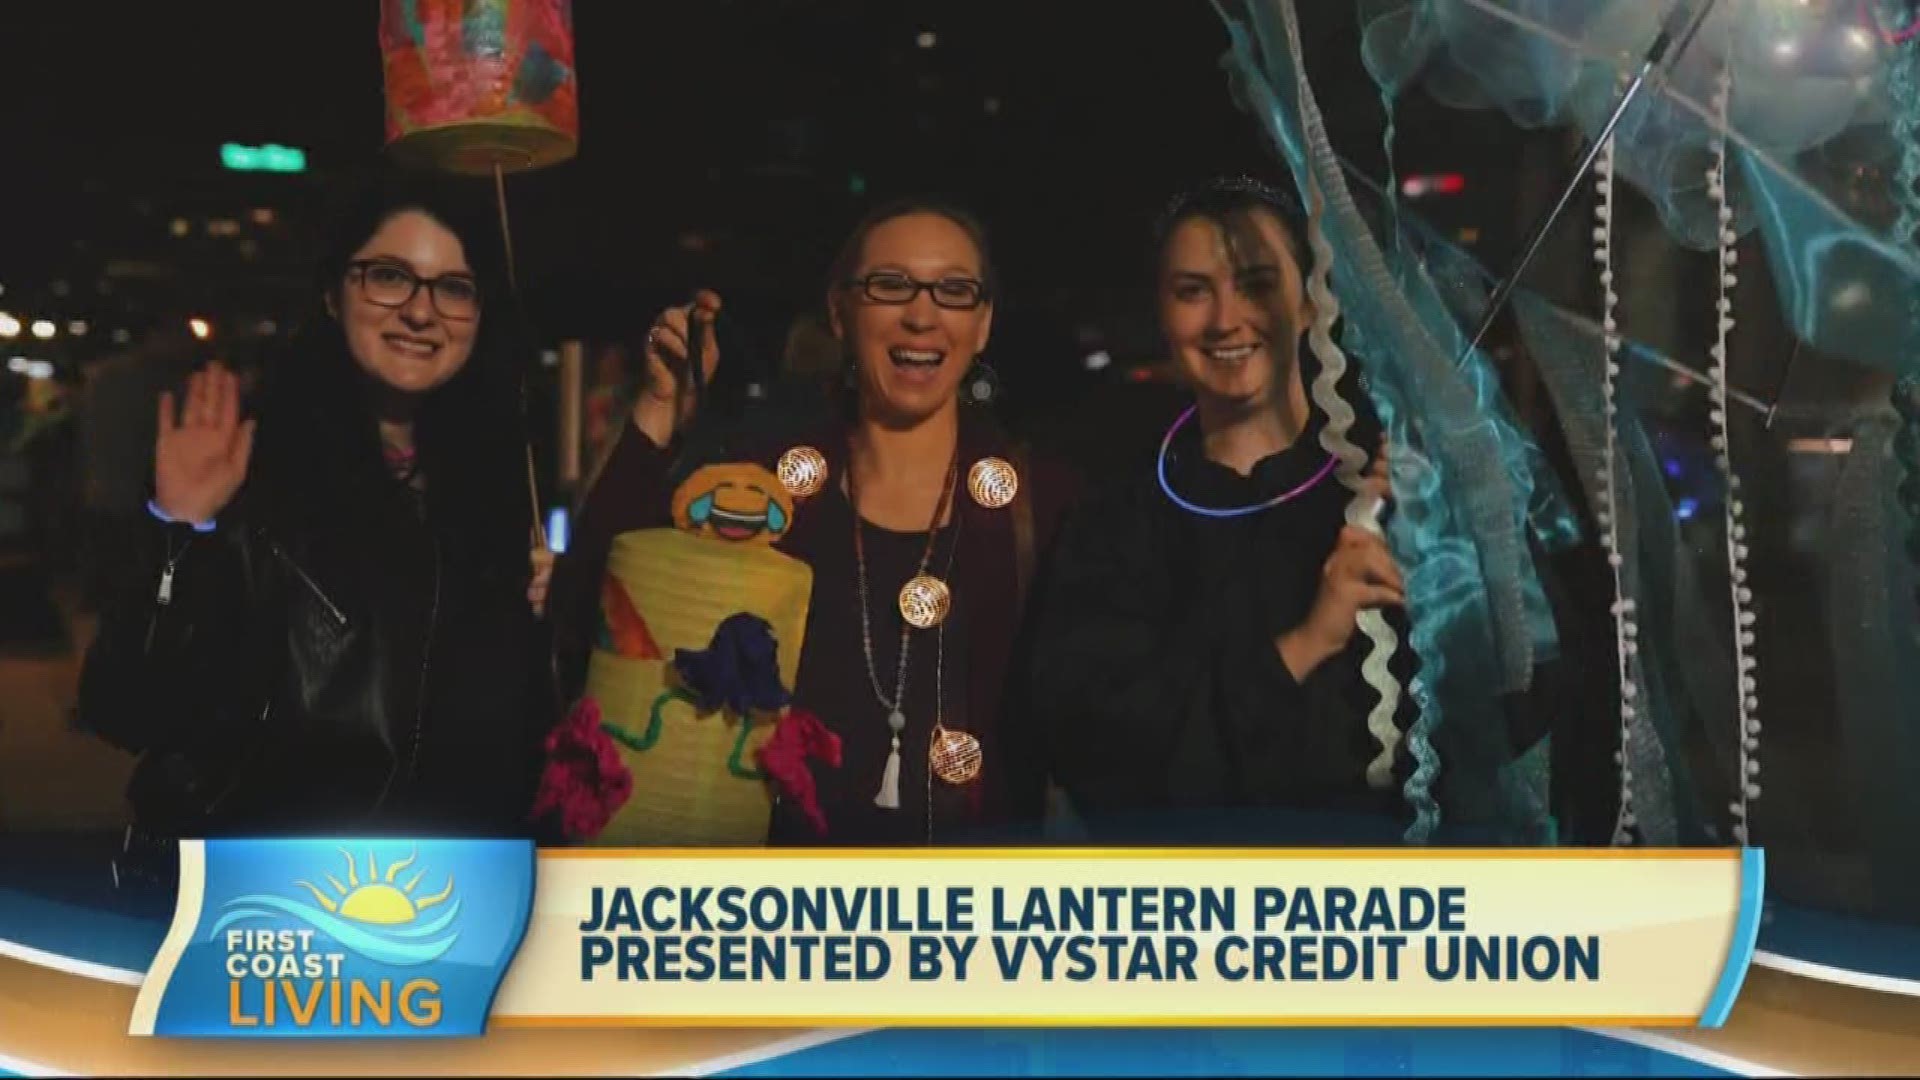 It's almost time for the Jacksonville Lantern Parade!